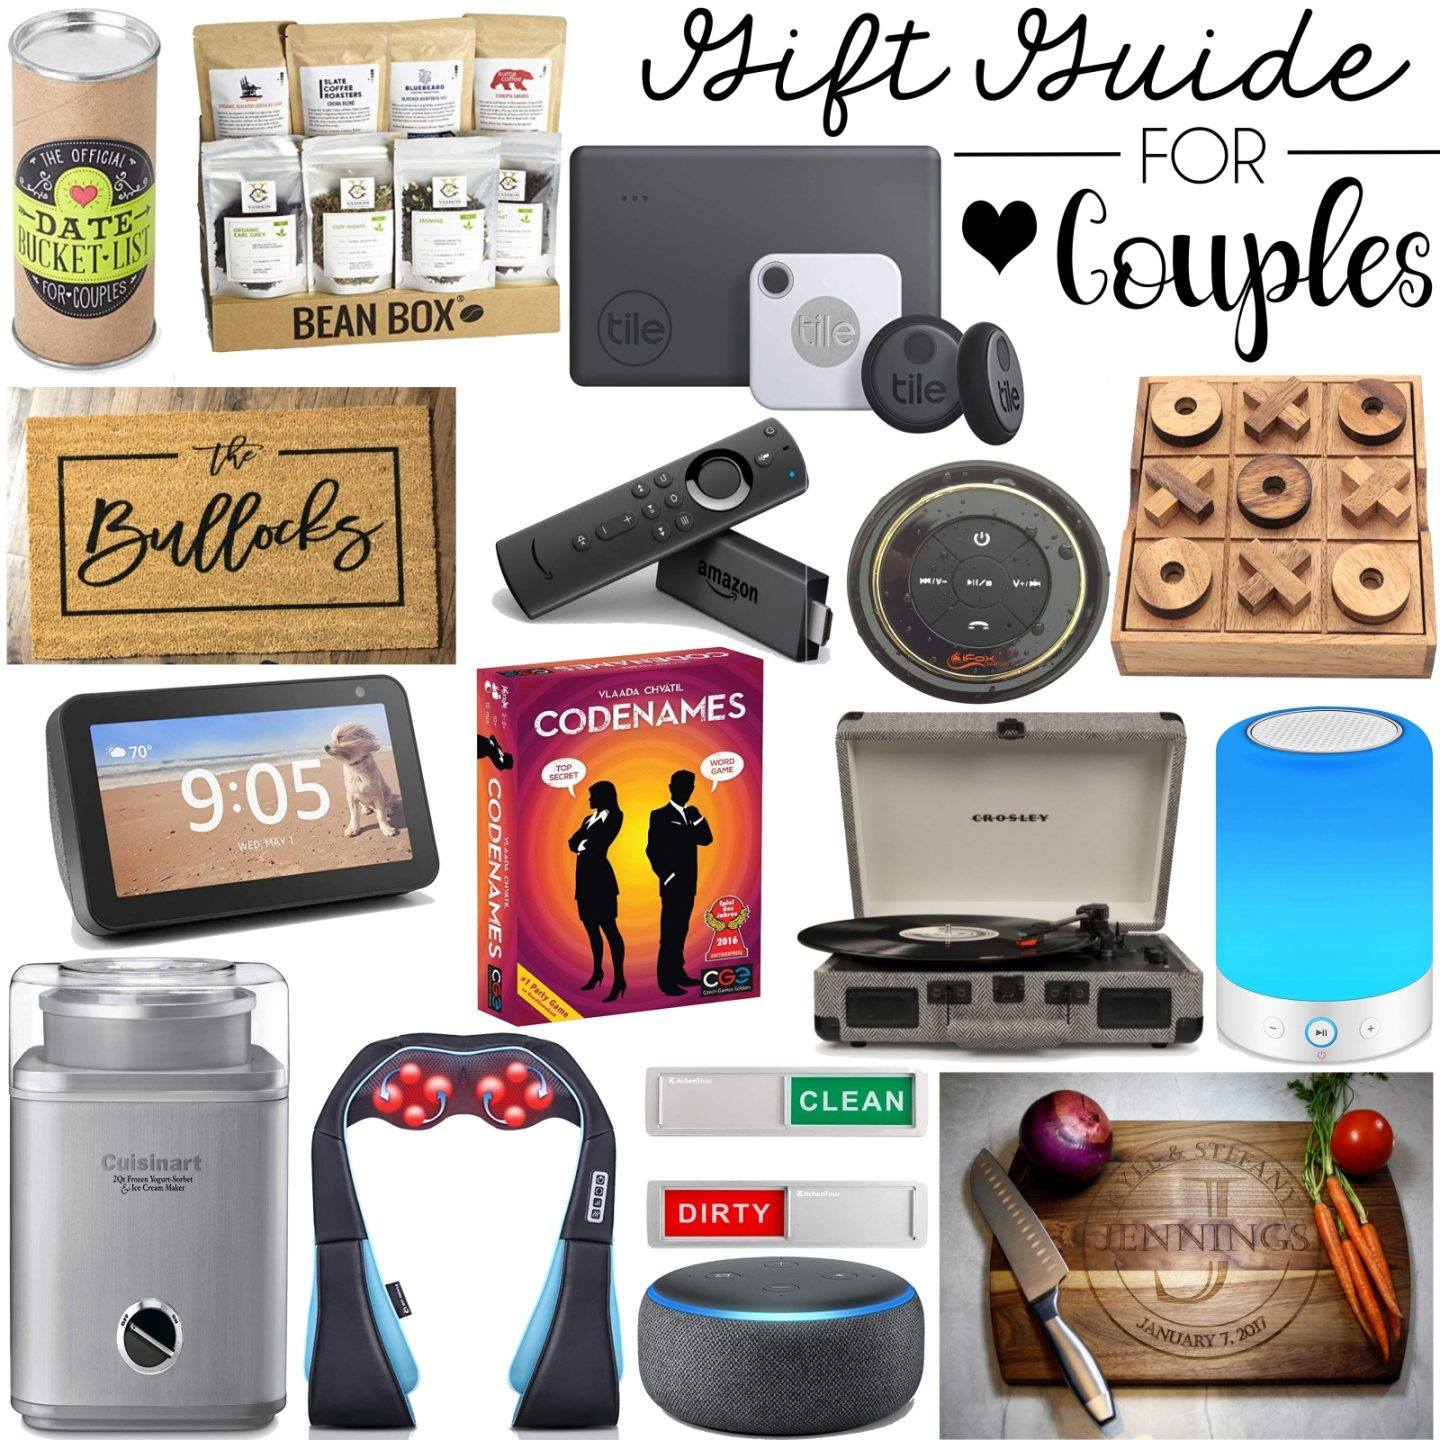 Christmas Gift Ideas For Couples Under 50
 Couples Gift Ideas to Buy for the Joint Christmas Presents